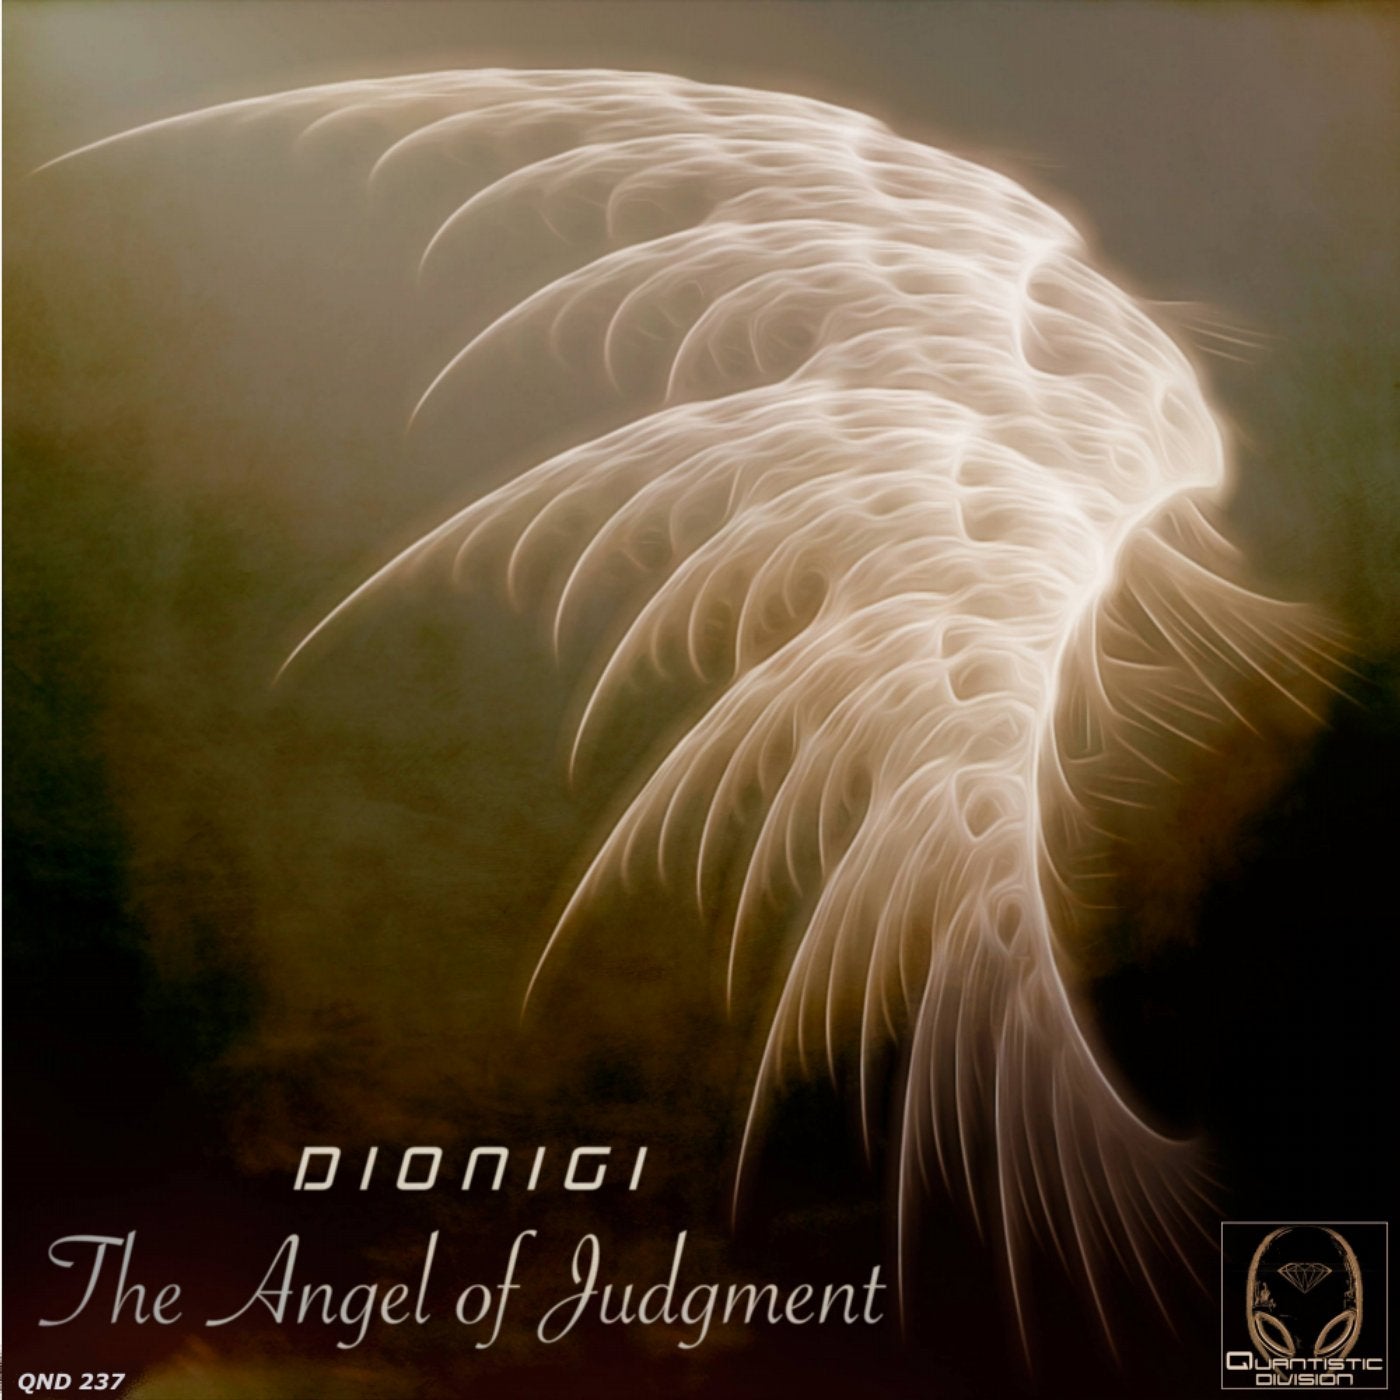 The Angel of Judgment